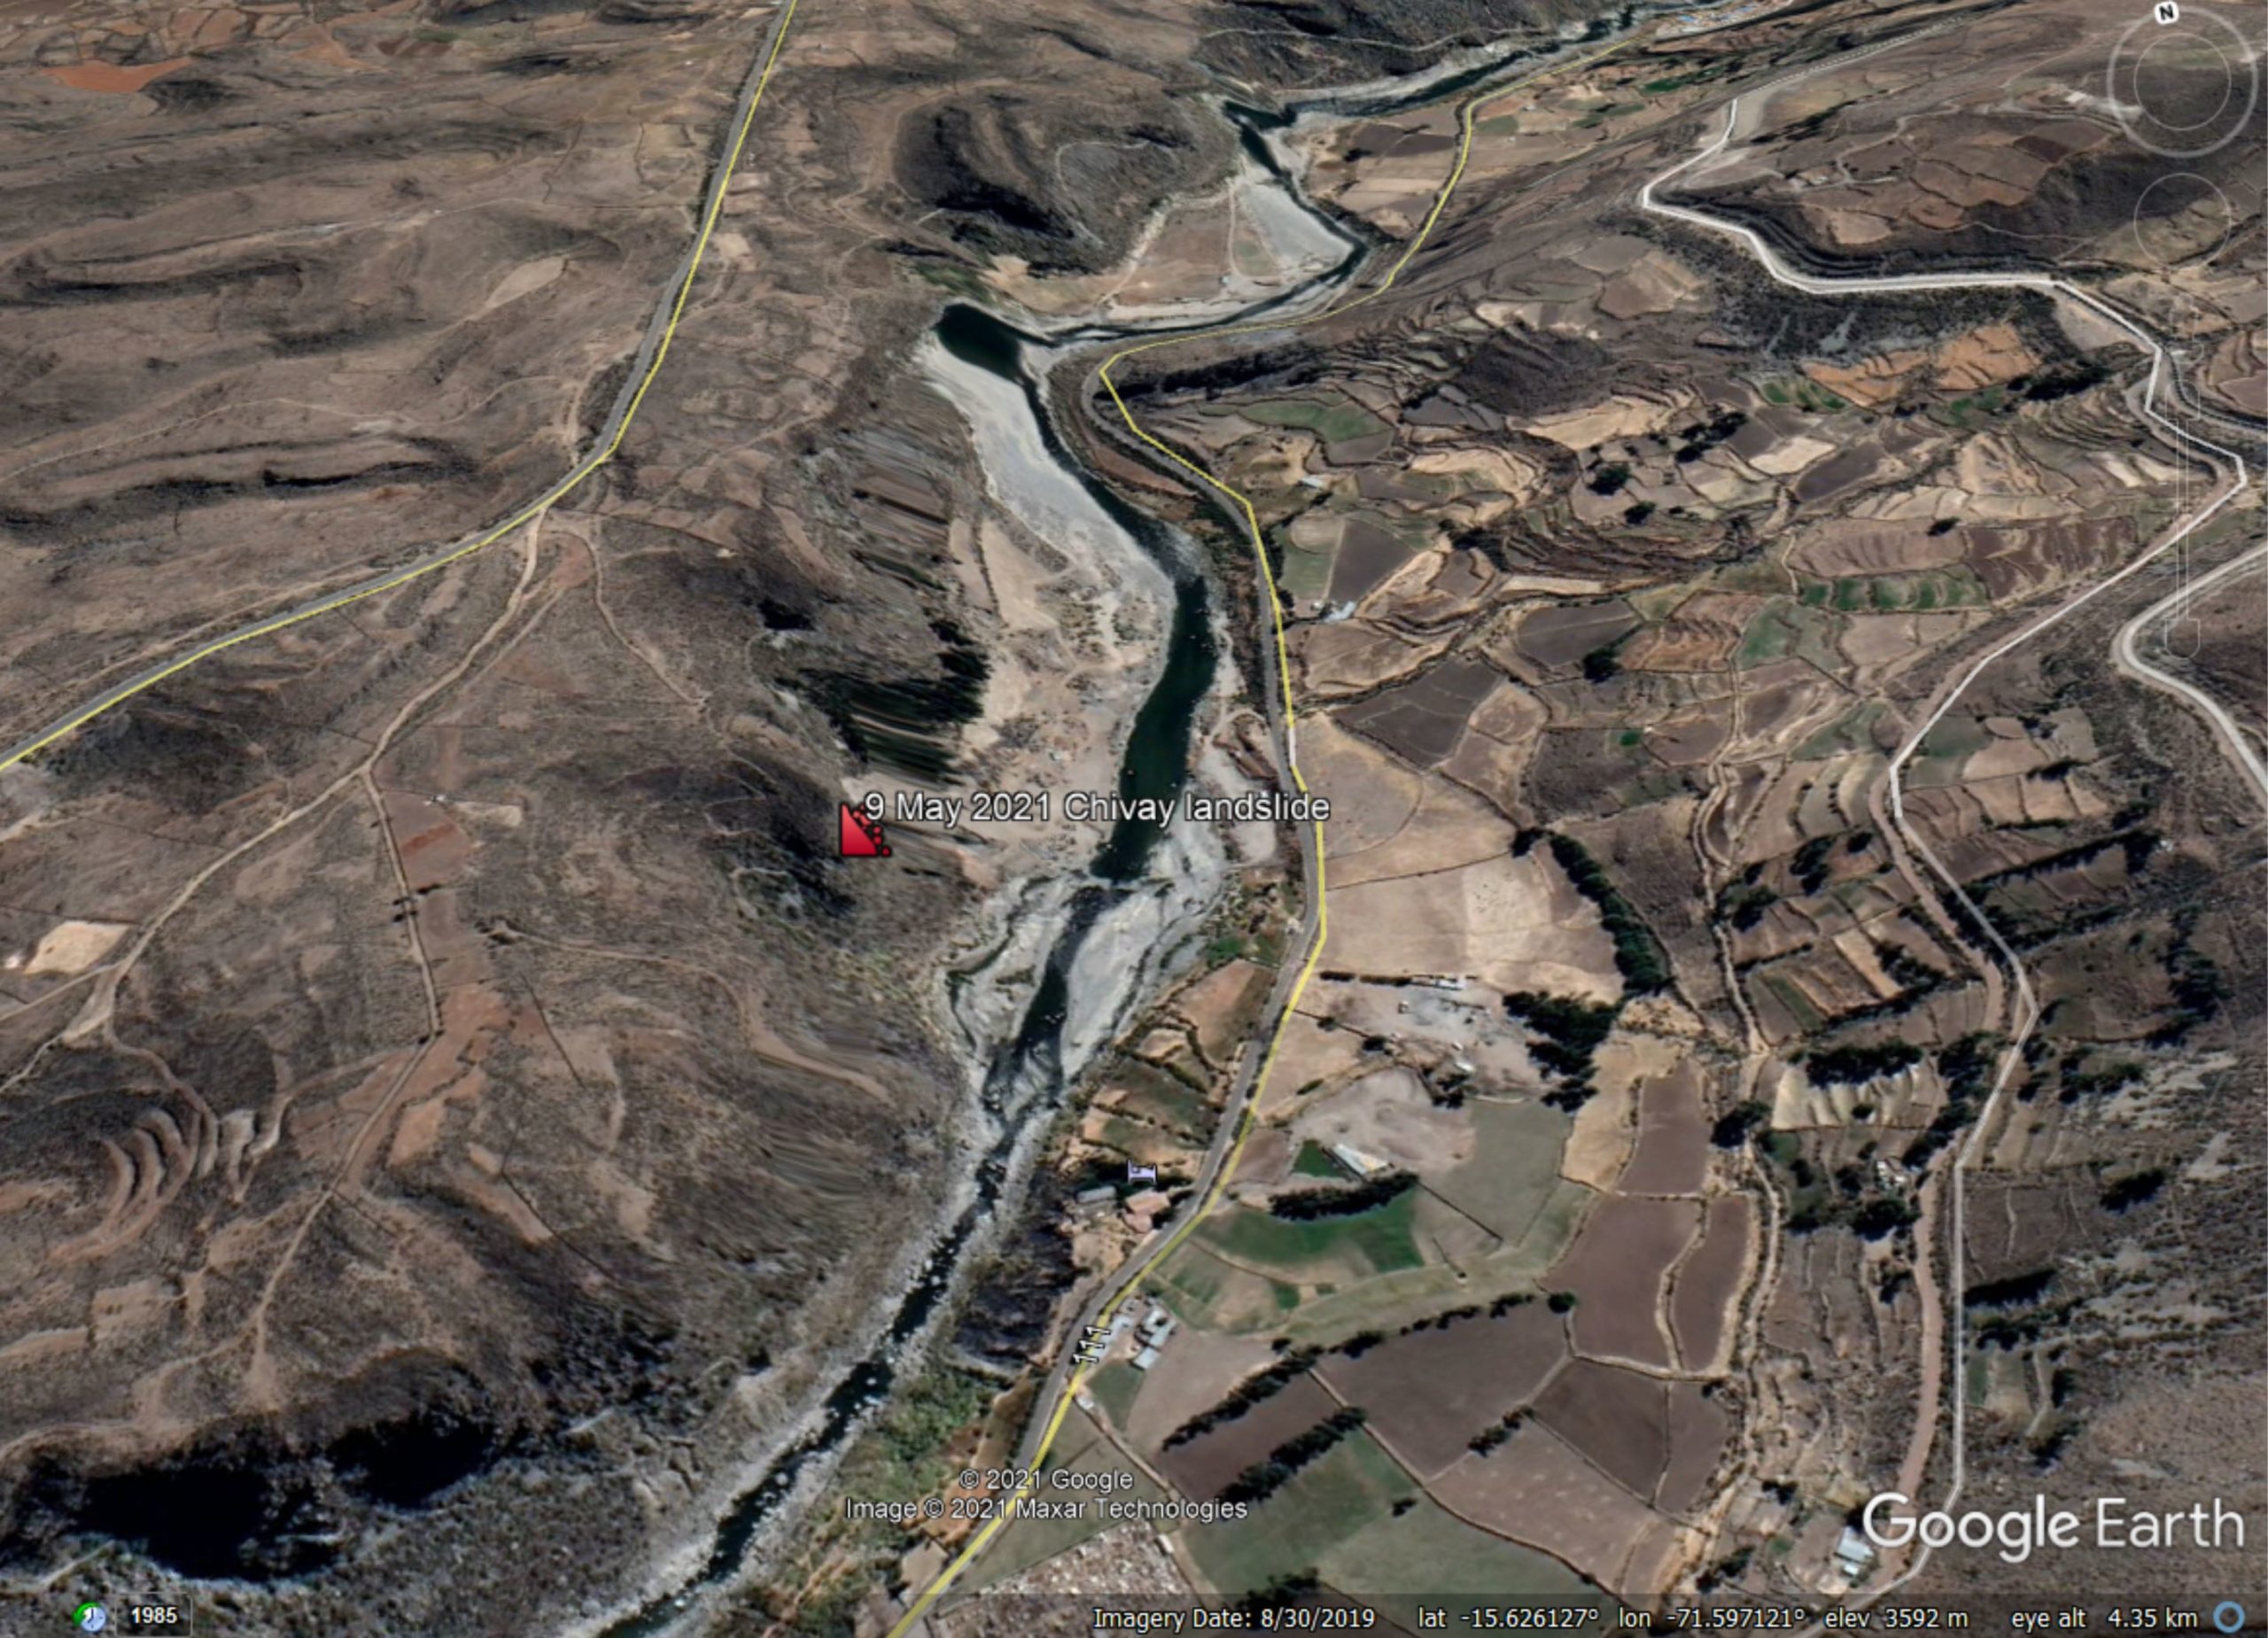 Google Earth image showing the location of the 9 May 2021 valley-blocking landslide at Chivay in Peru.